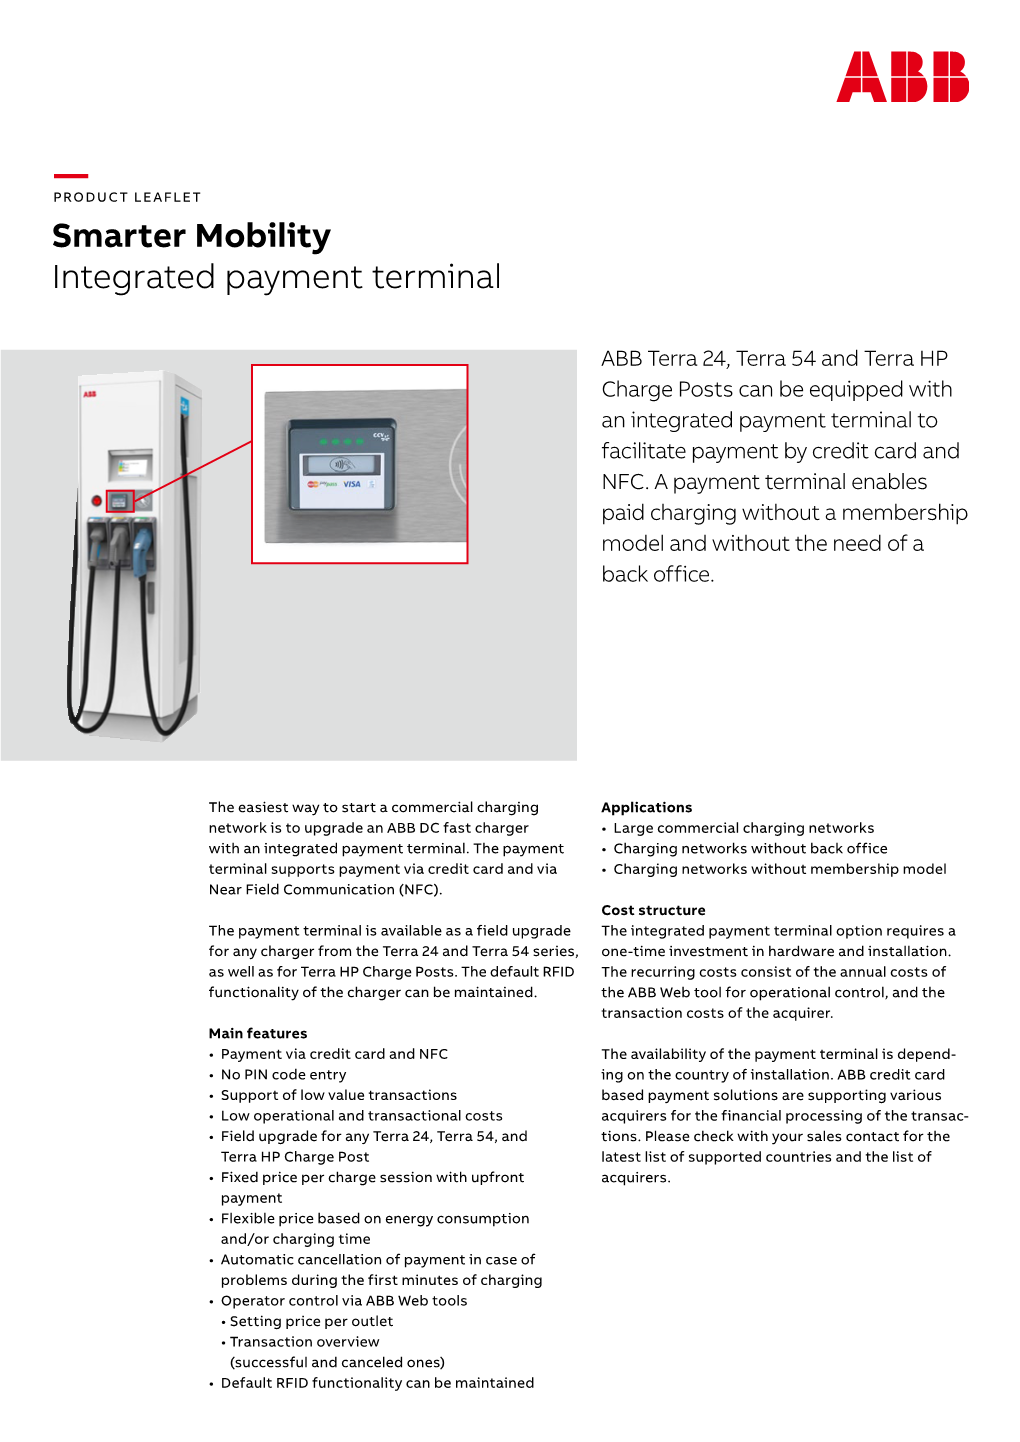 — Smarter Mobility Integrated Payment Terminal